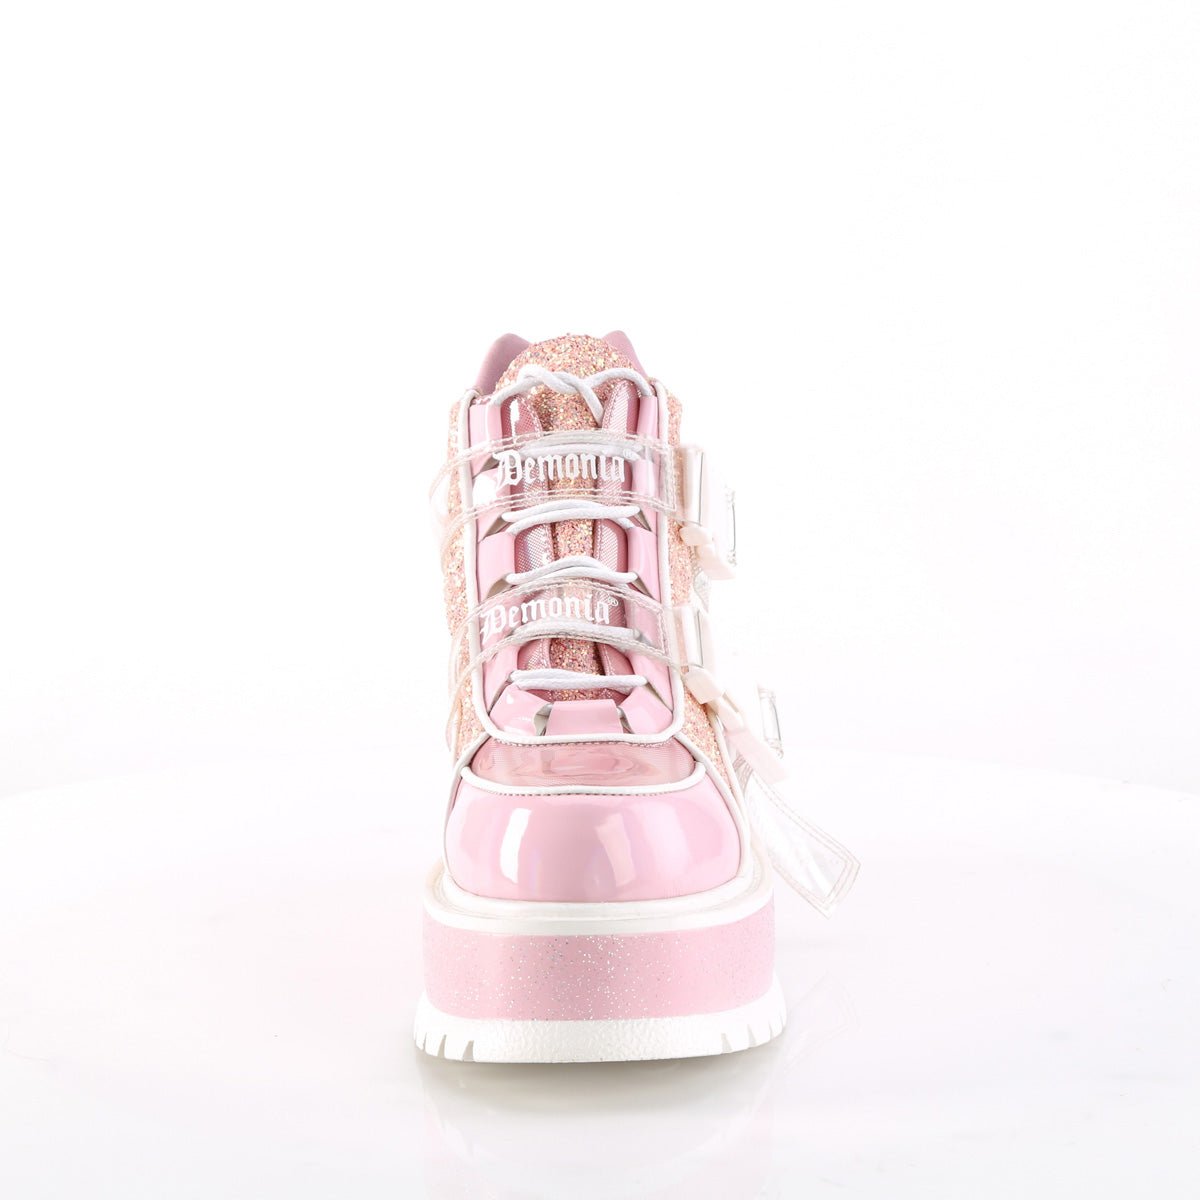 Too Fast | Demonia Slacker 50 | Baby Pink Patent Leather & Glitter Women's Ankle Boots